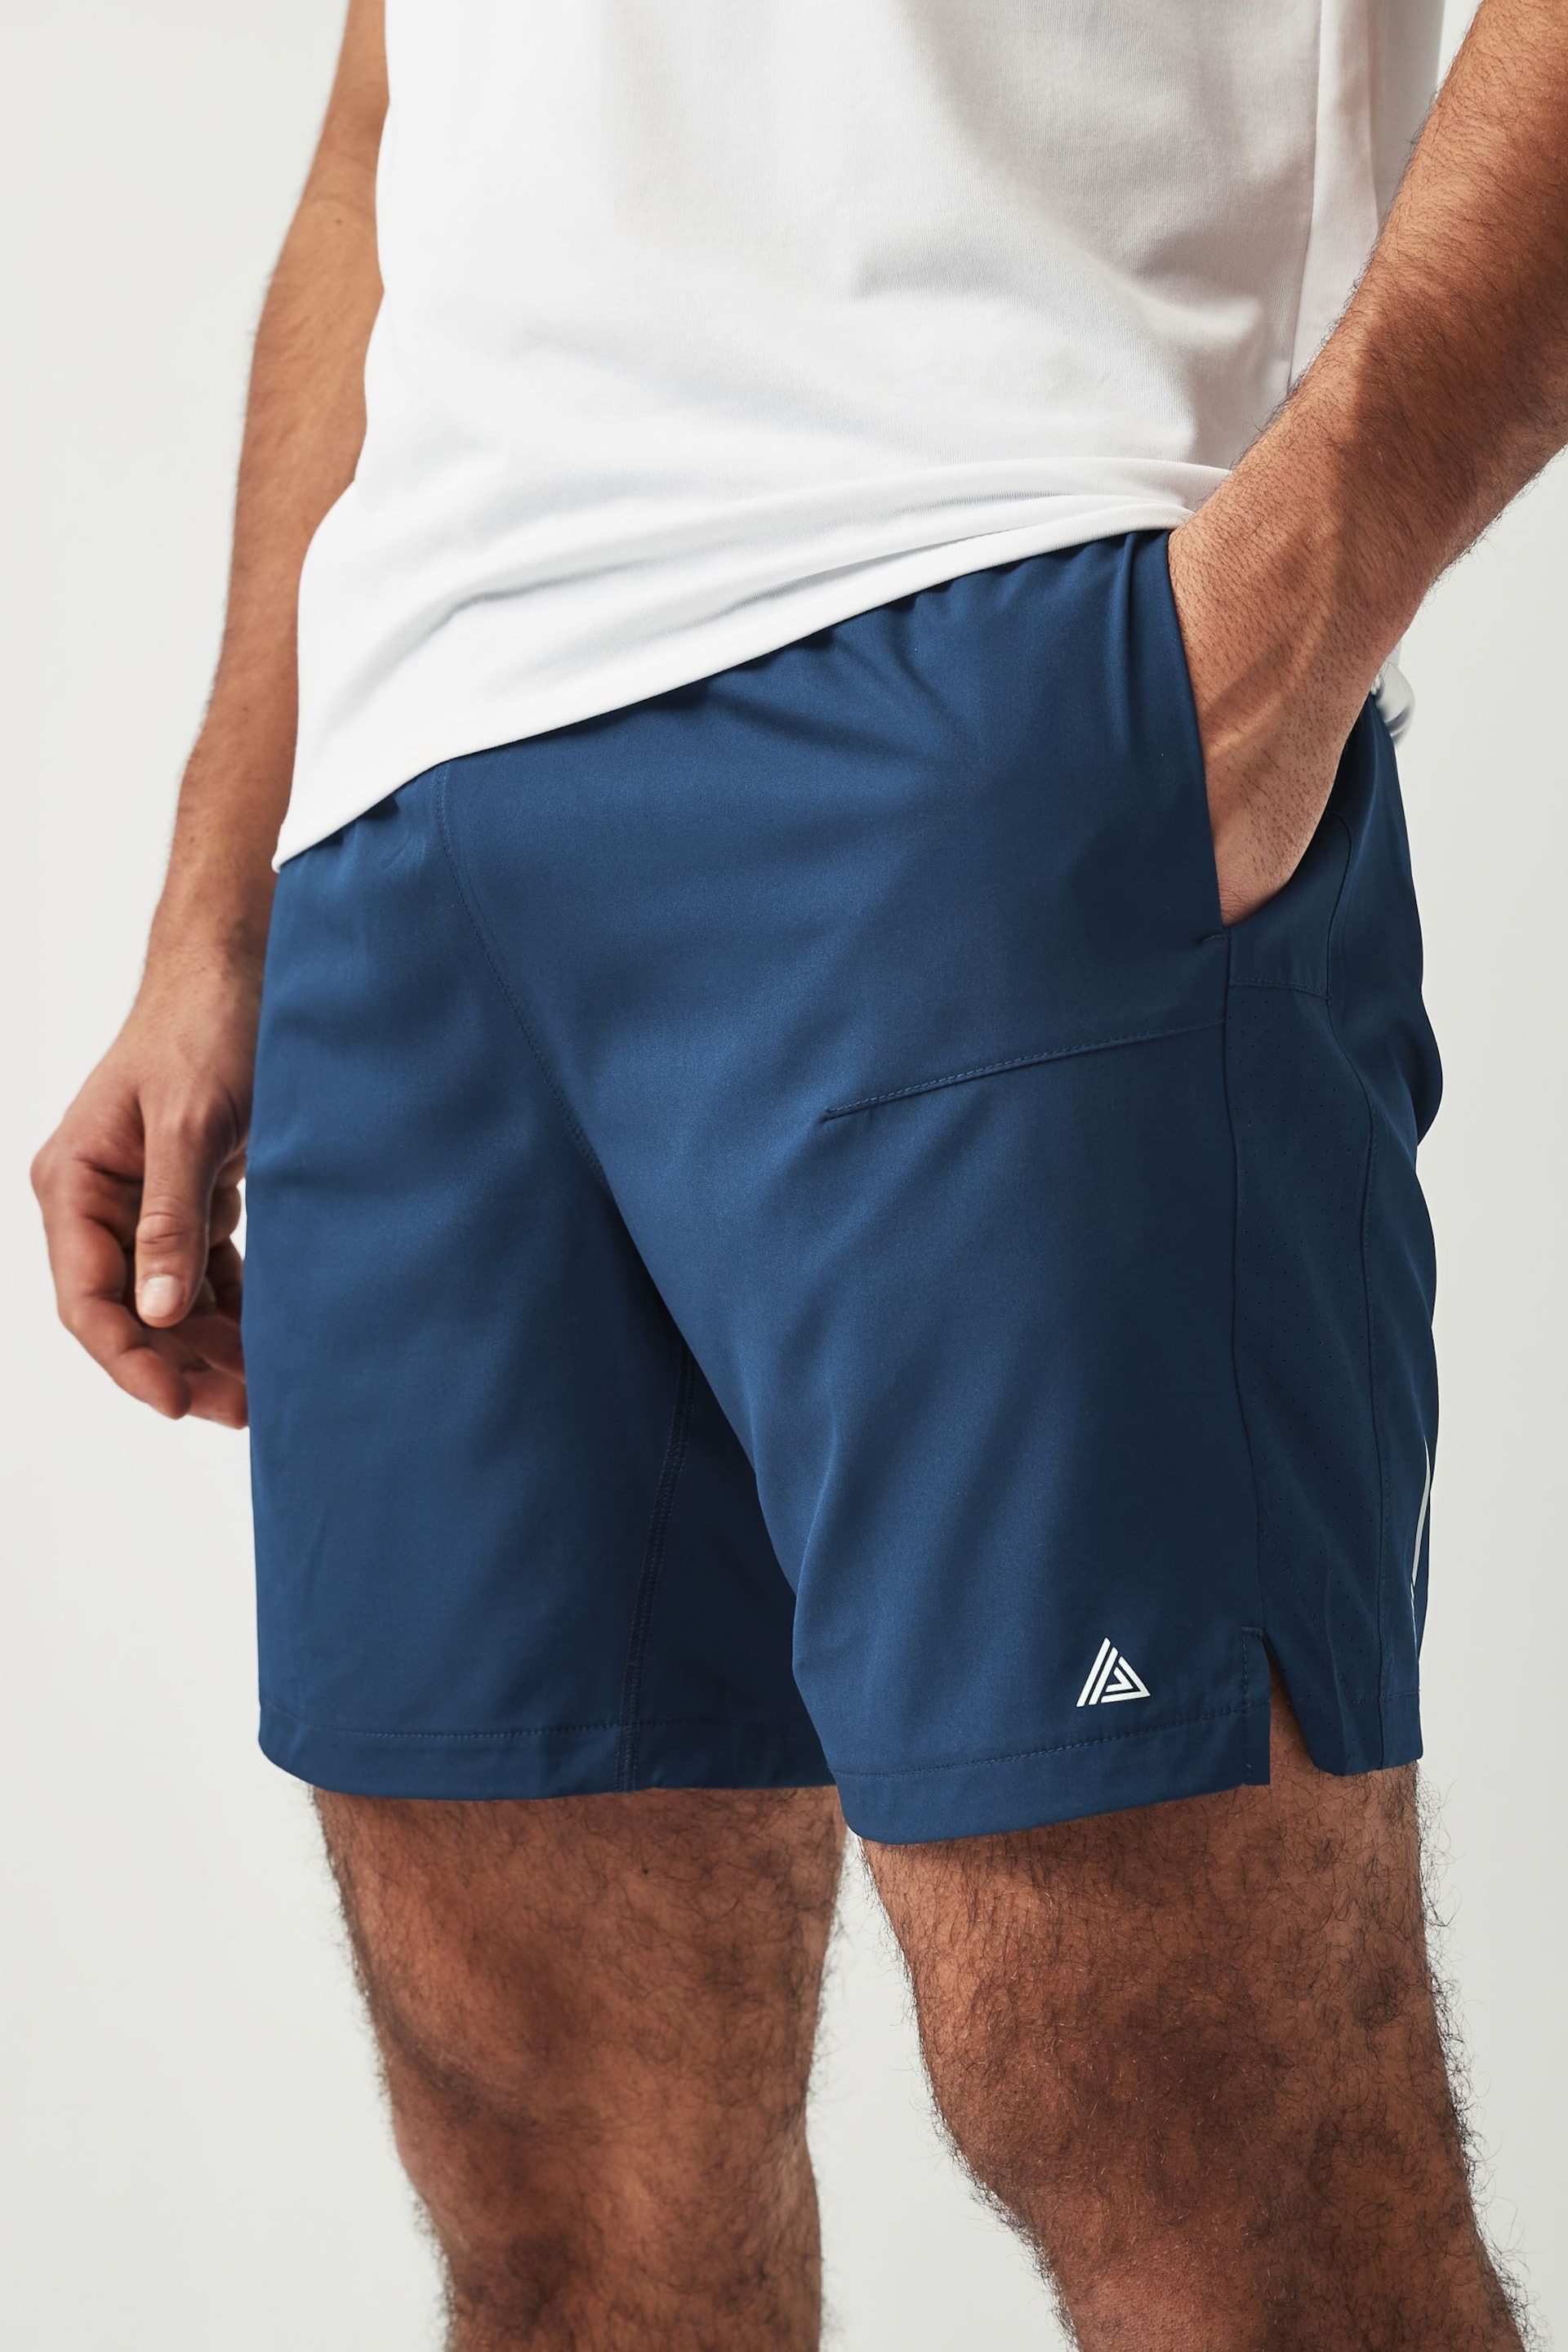 Blue 7 Inch Active Gym Sports Shorts - Image 3 of 10